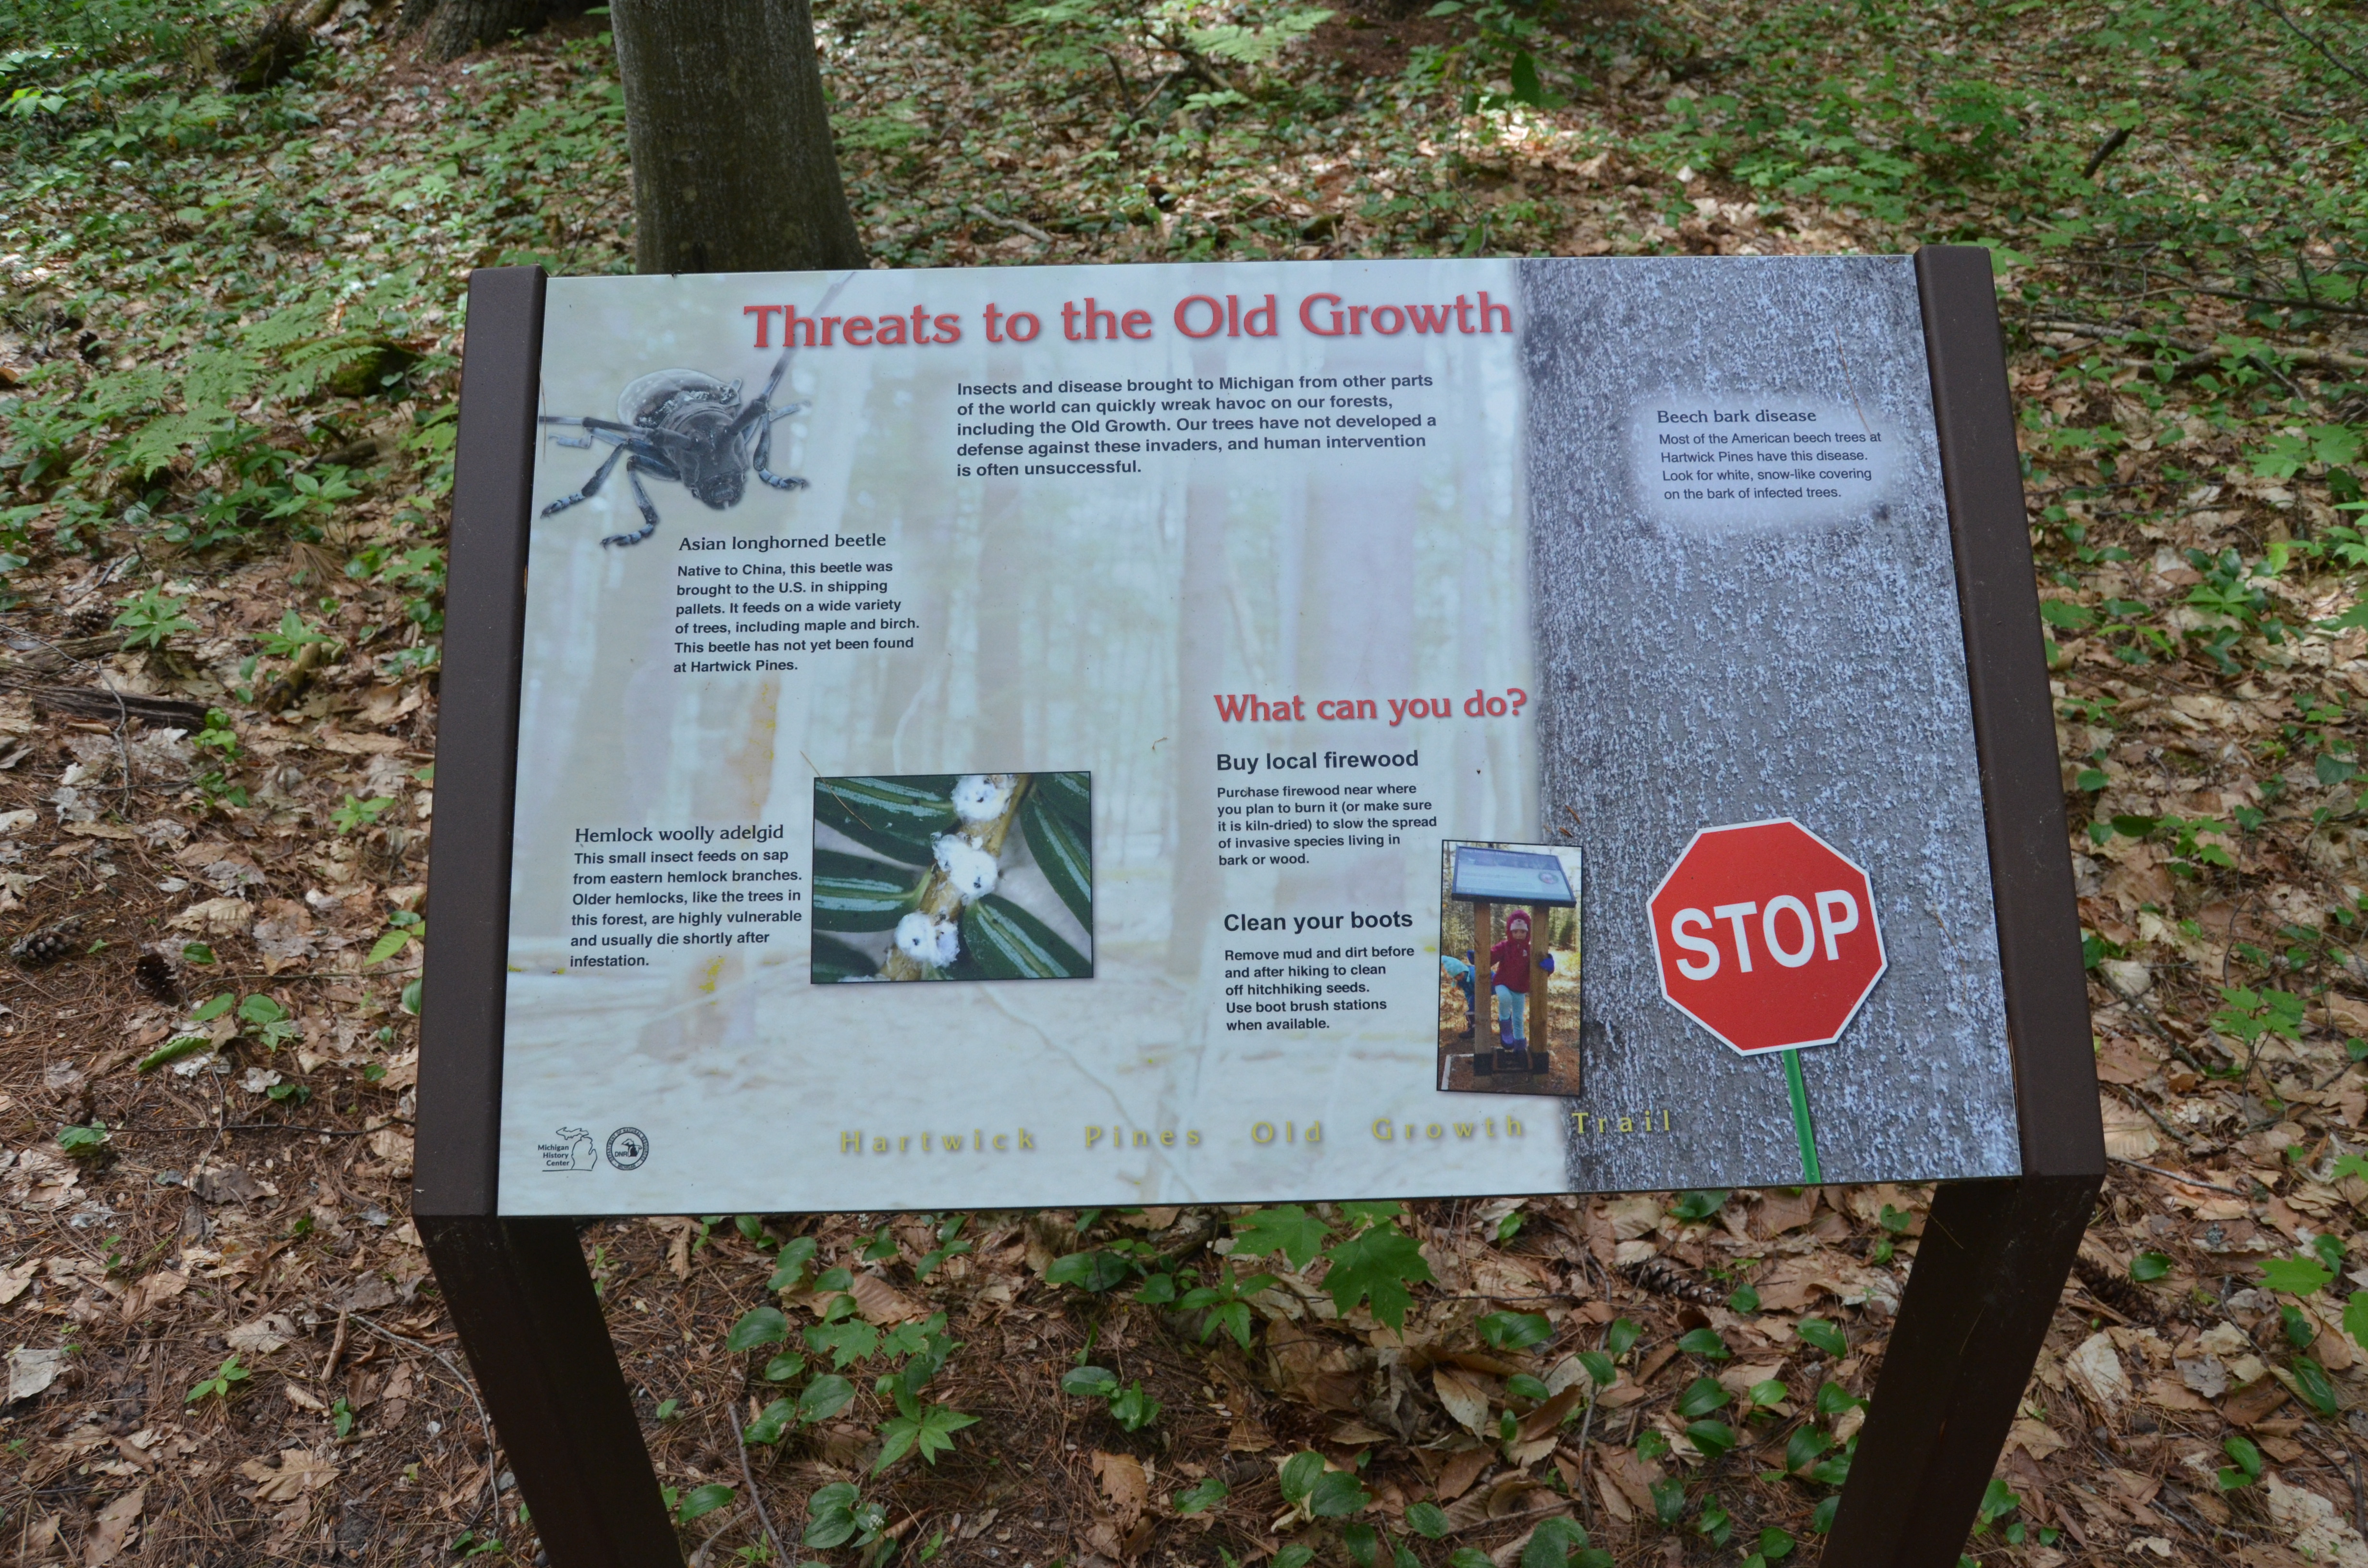 Hartwick Pines State Park Threats to Forest